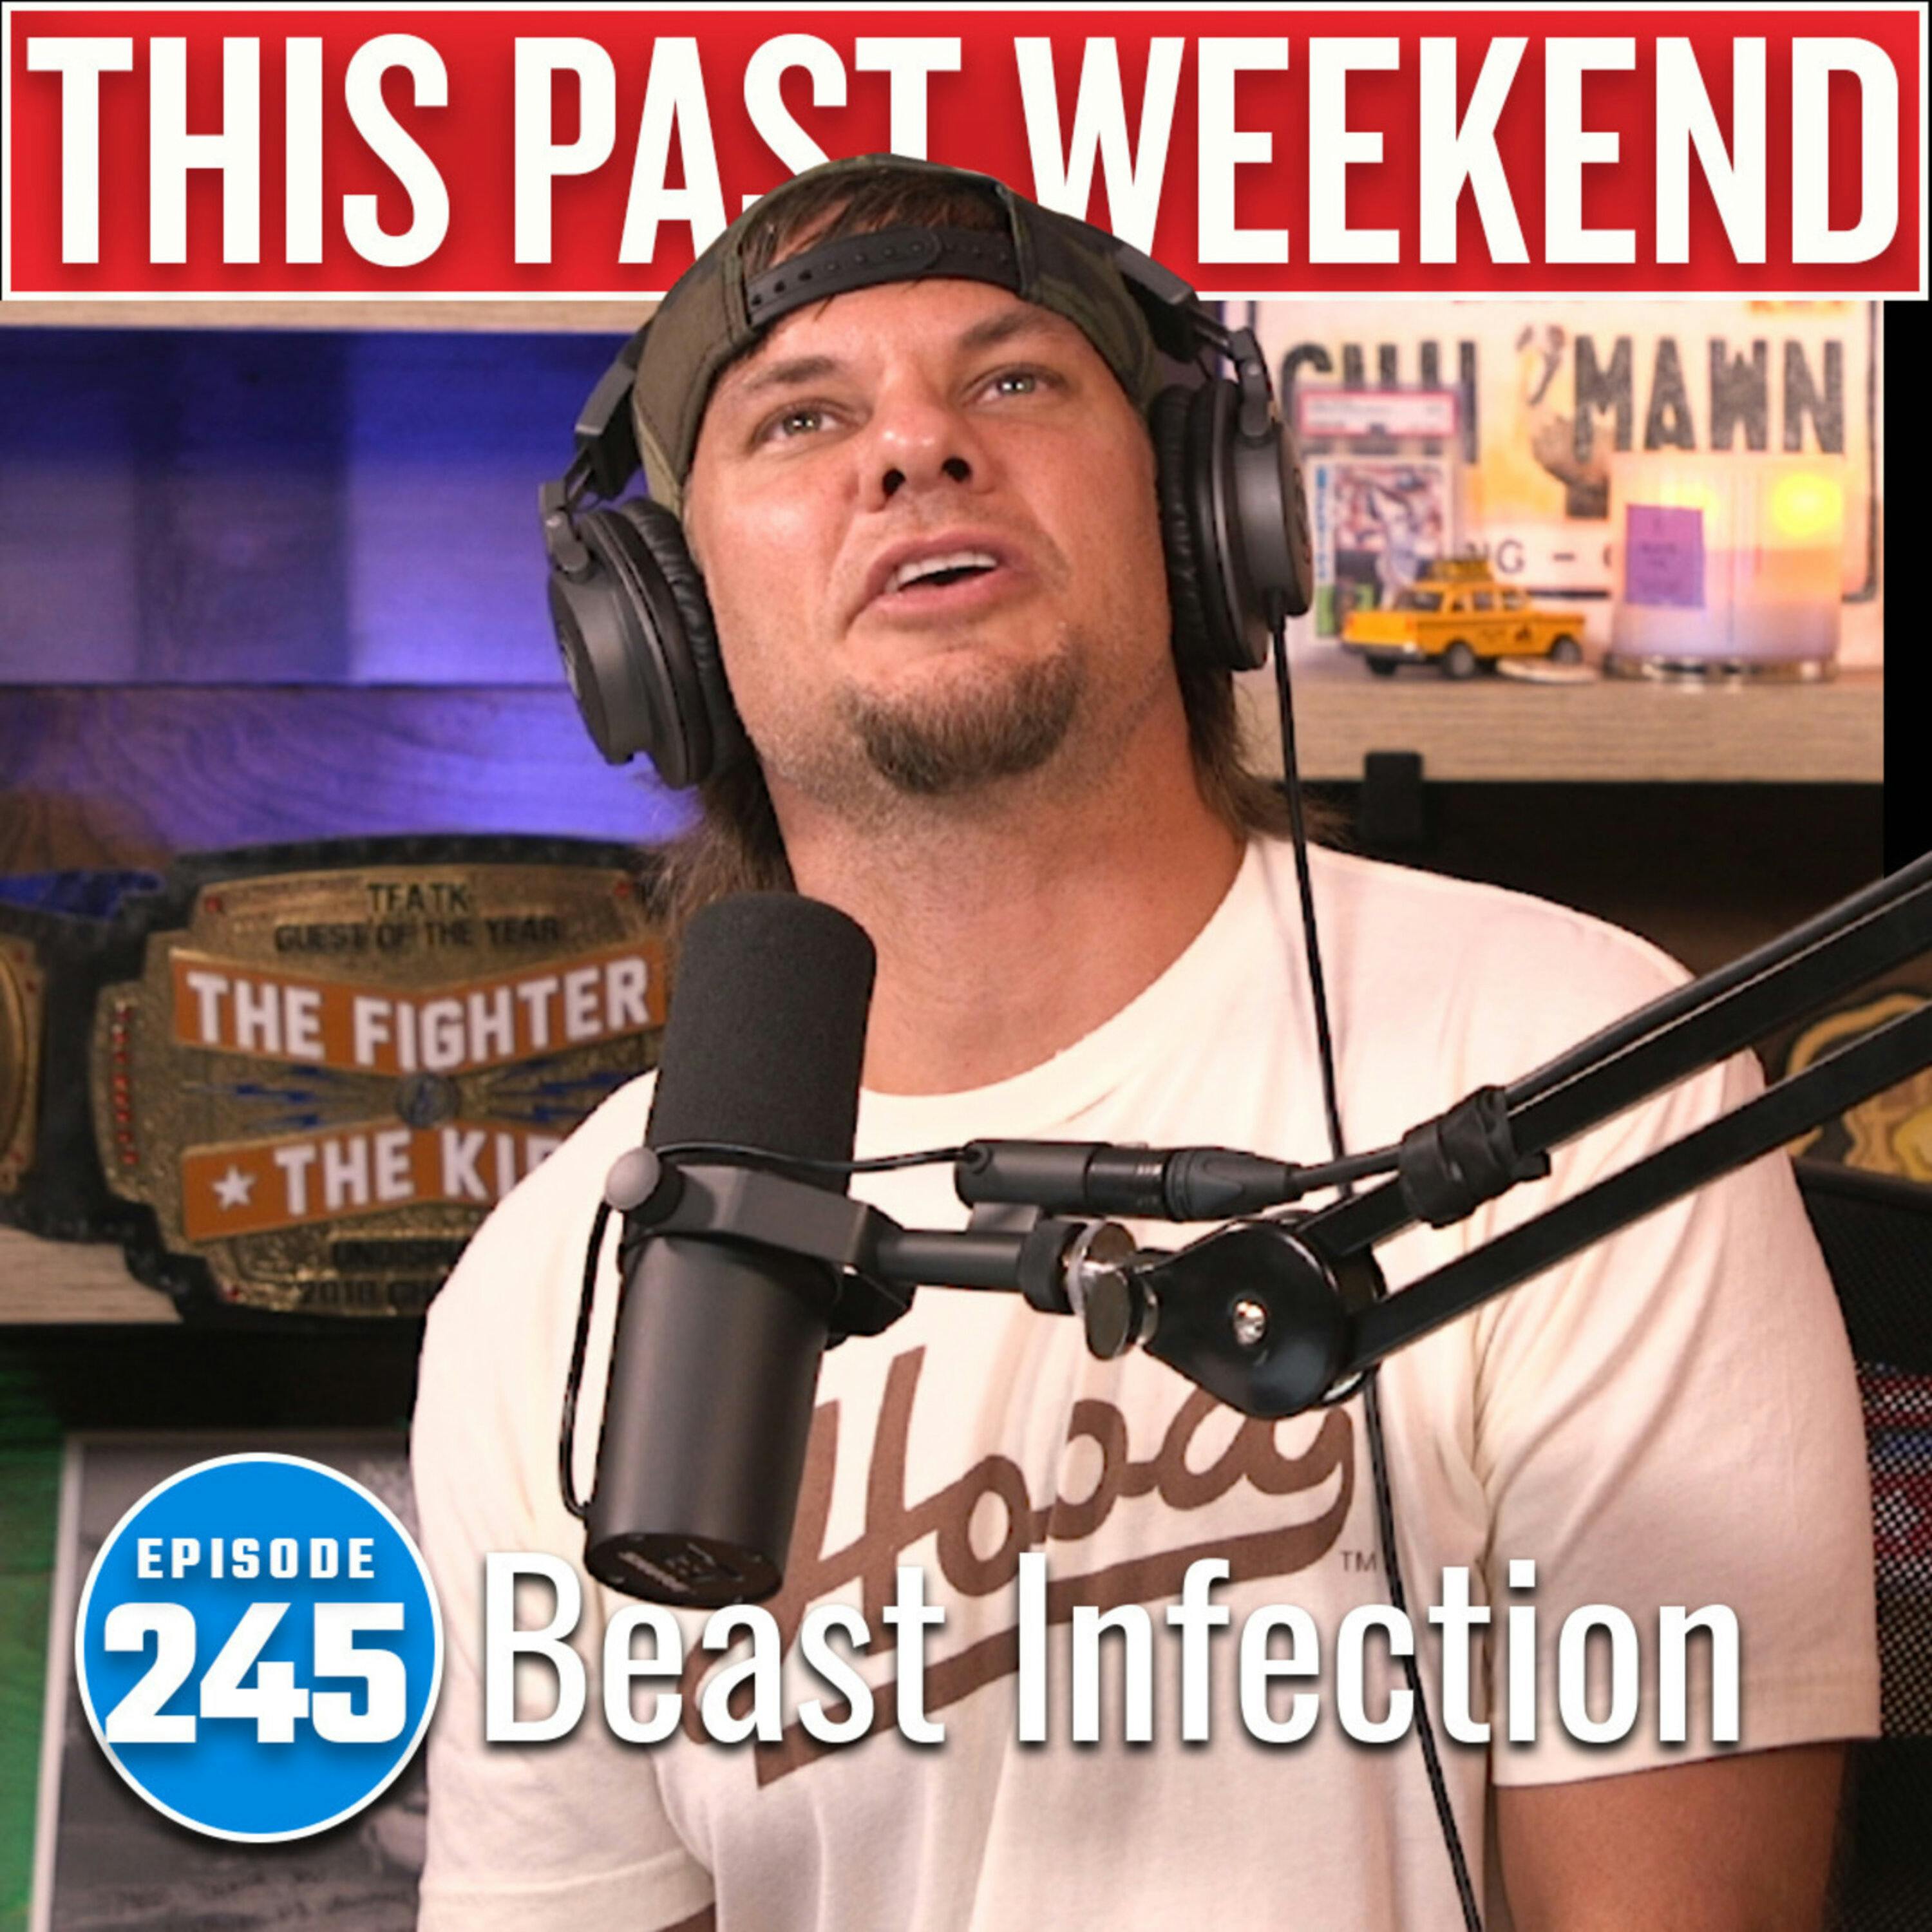 Beast Infection | This Past Weekend #245 by Theo Von